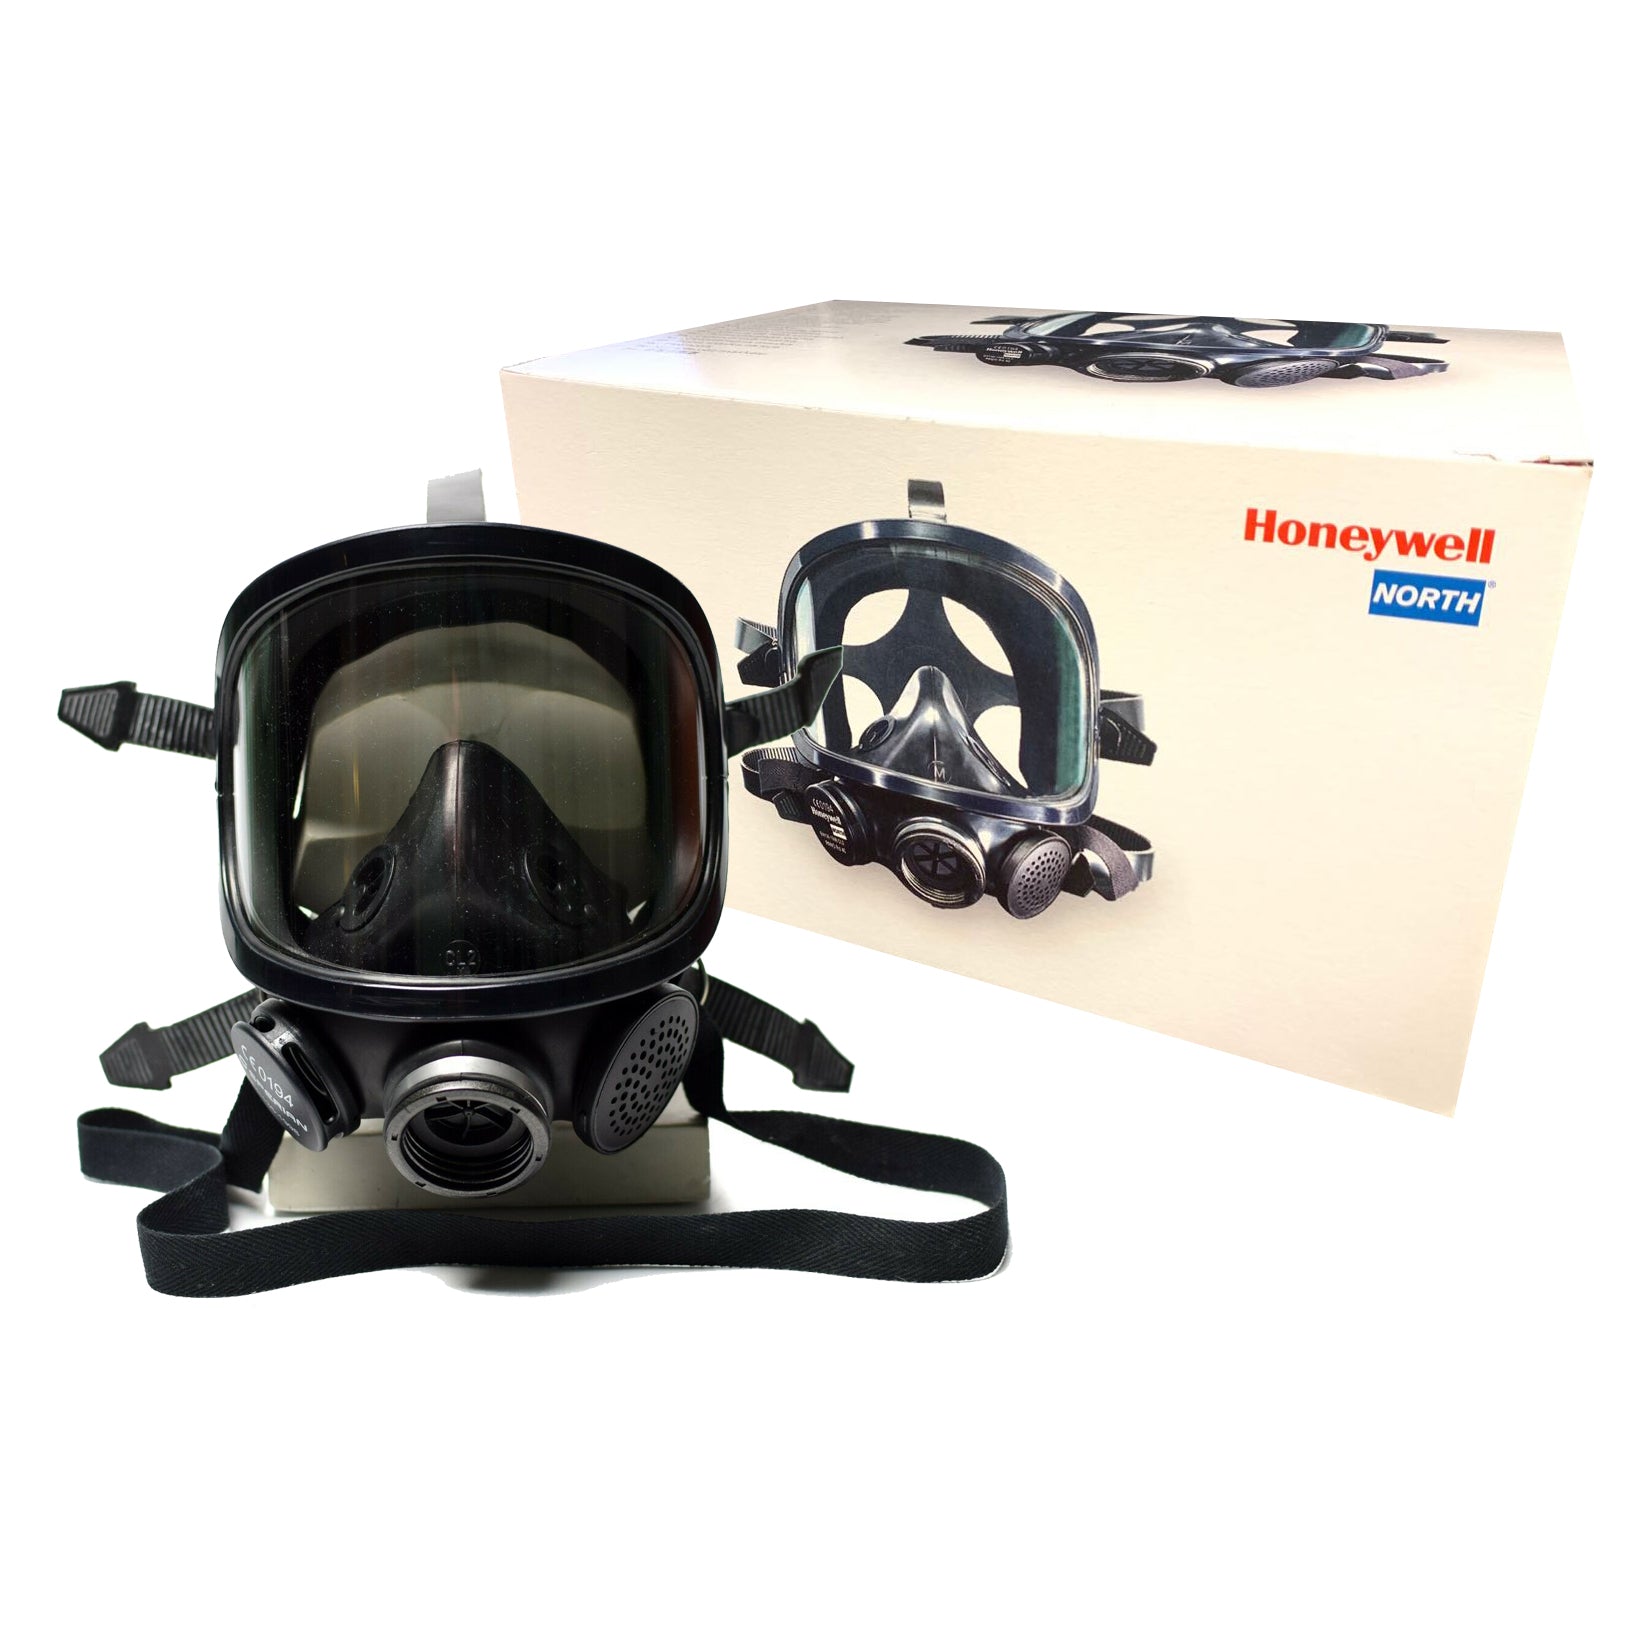 Honeywell 1710395 Panoramasque Full Face Respirator Masks with package